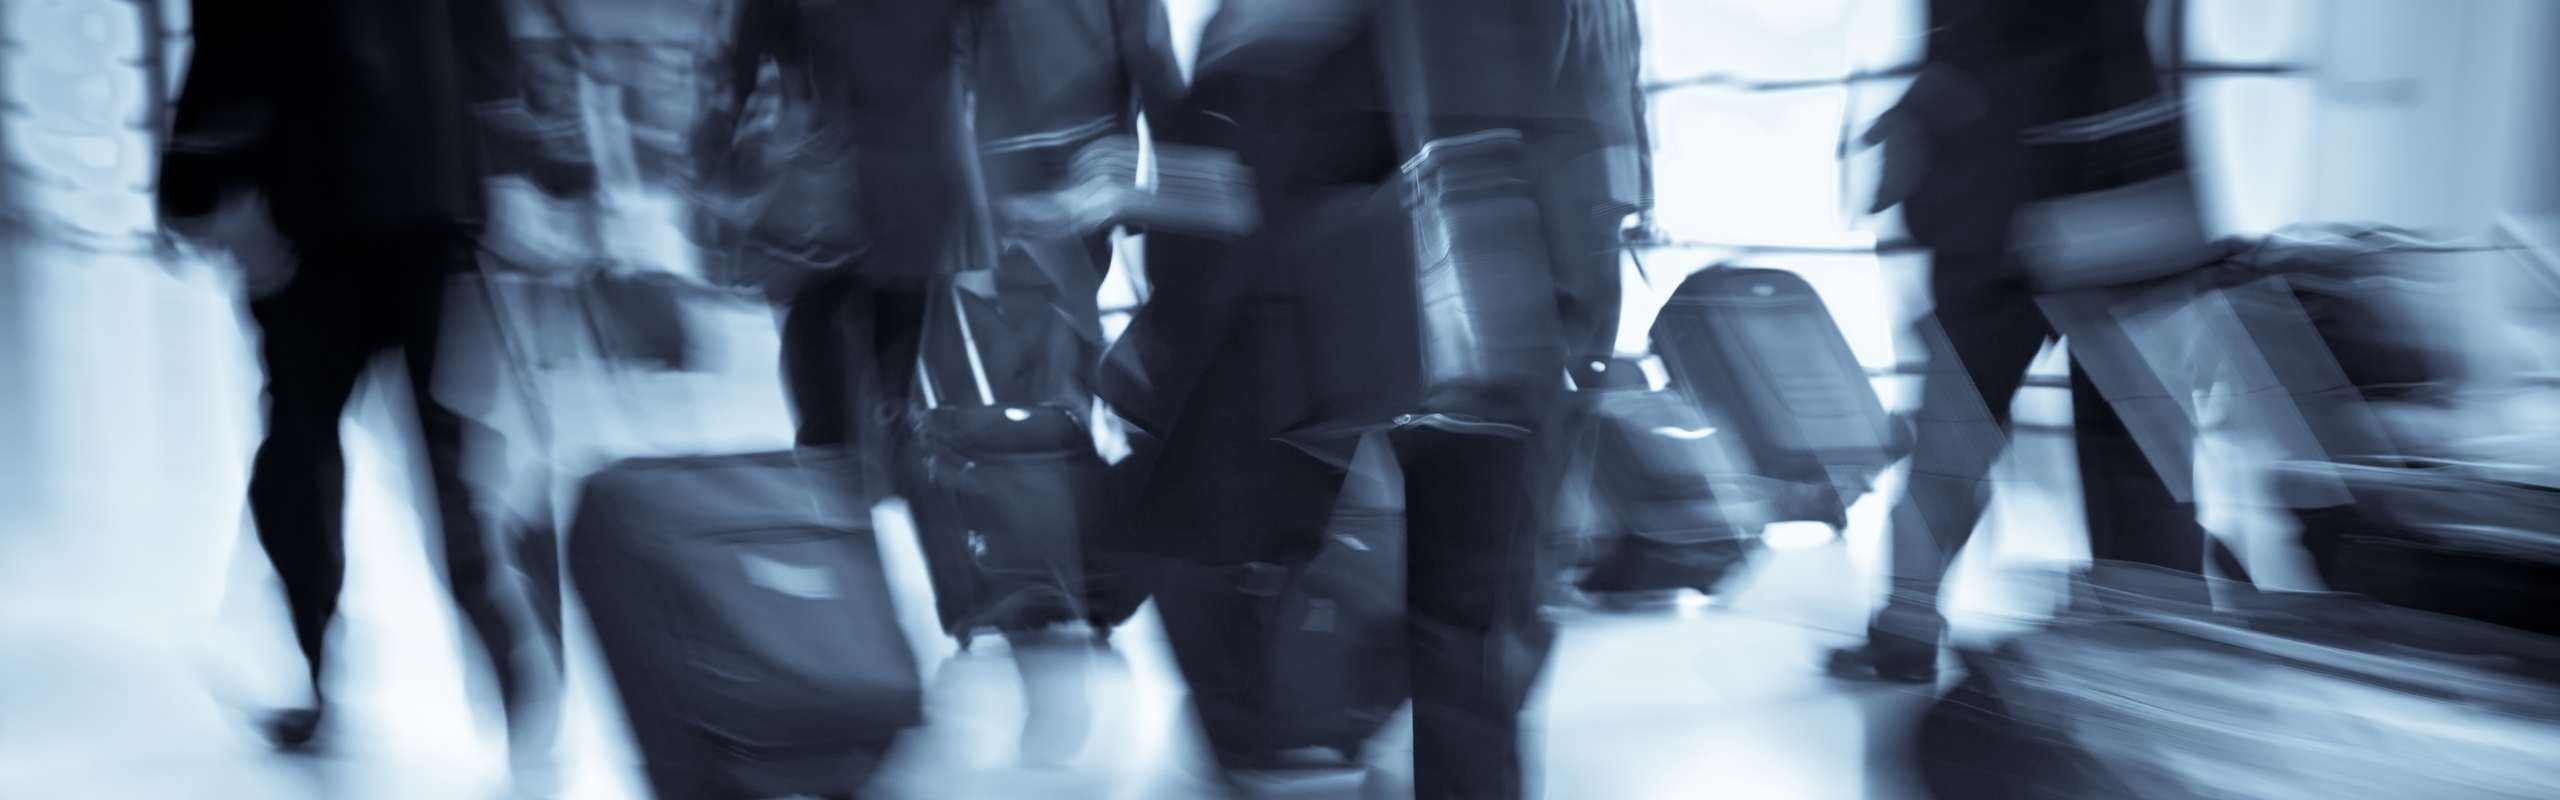 Crowd of business professionals traveling, blurred